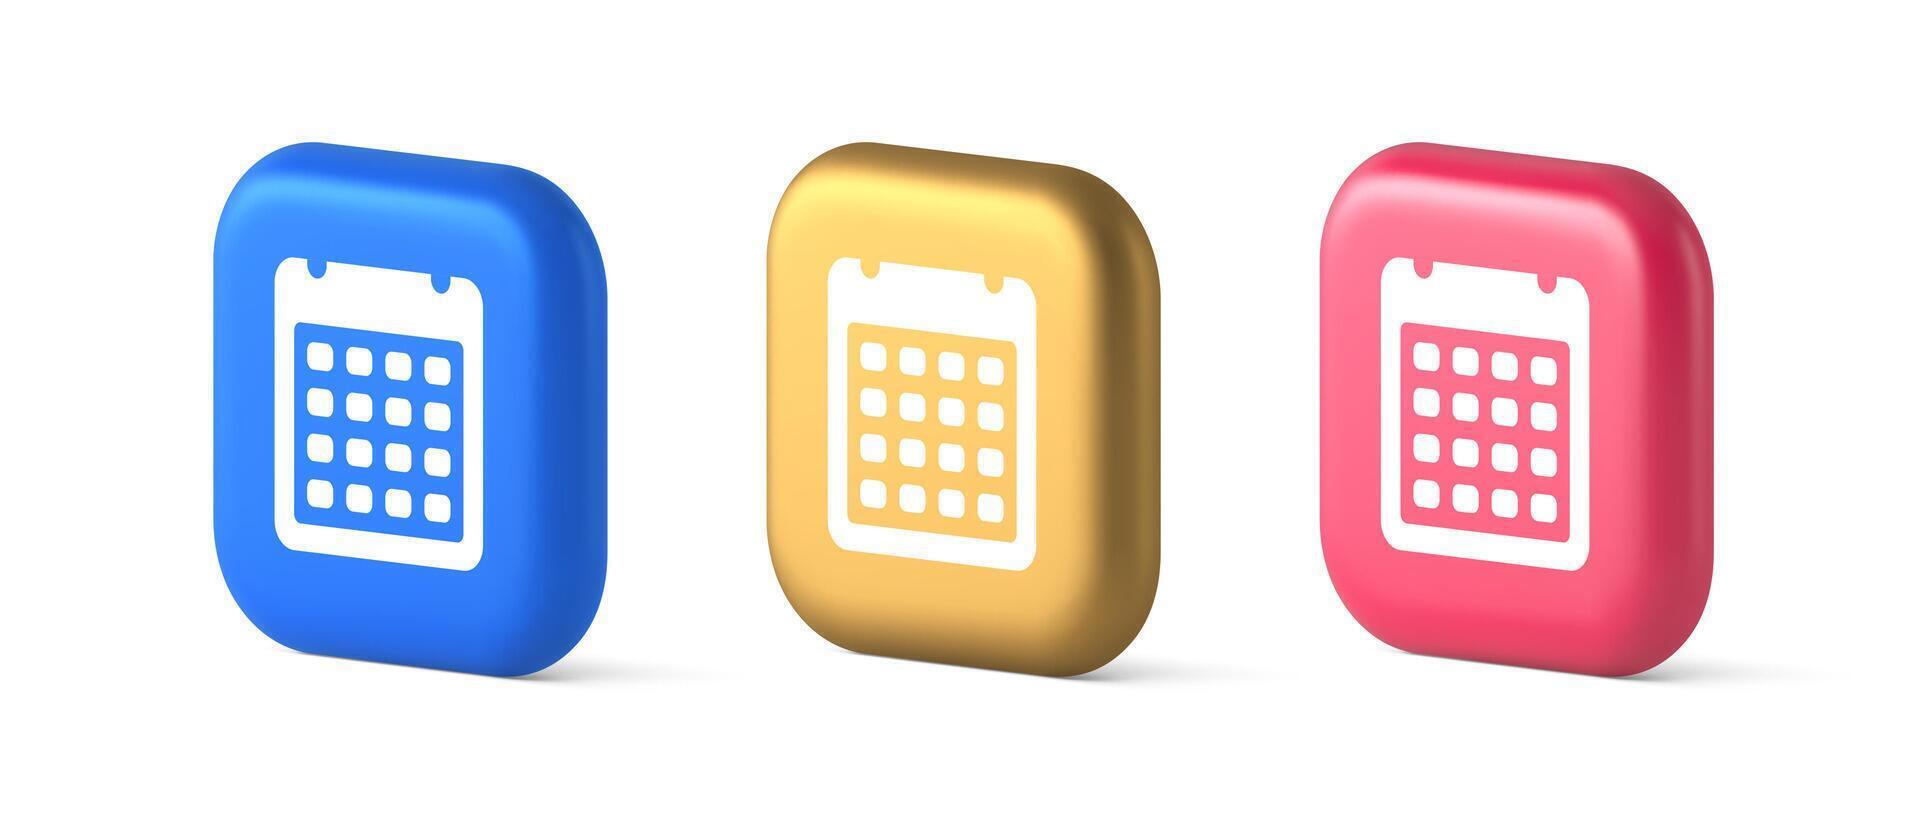 Calendar schedule button agenda event appointment reminder 3d realistic icon vector